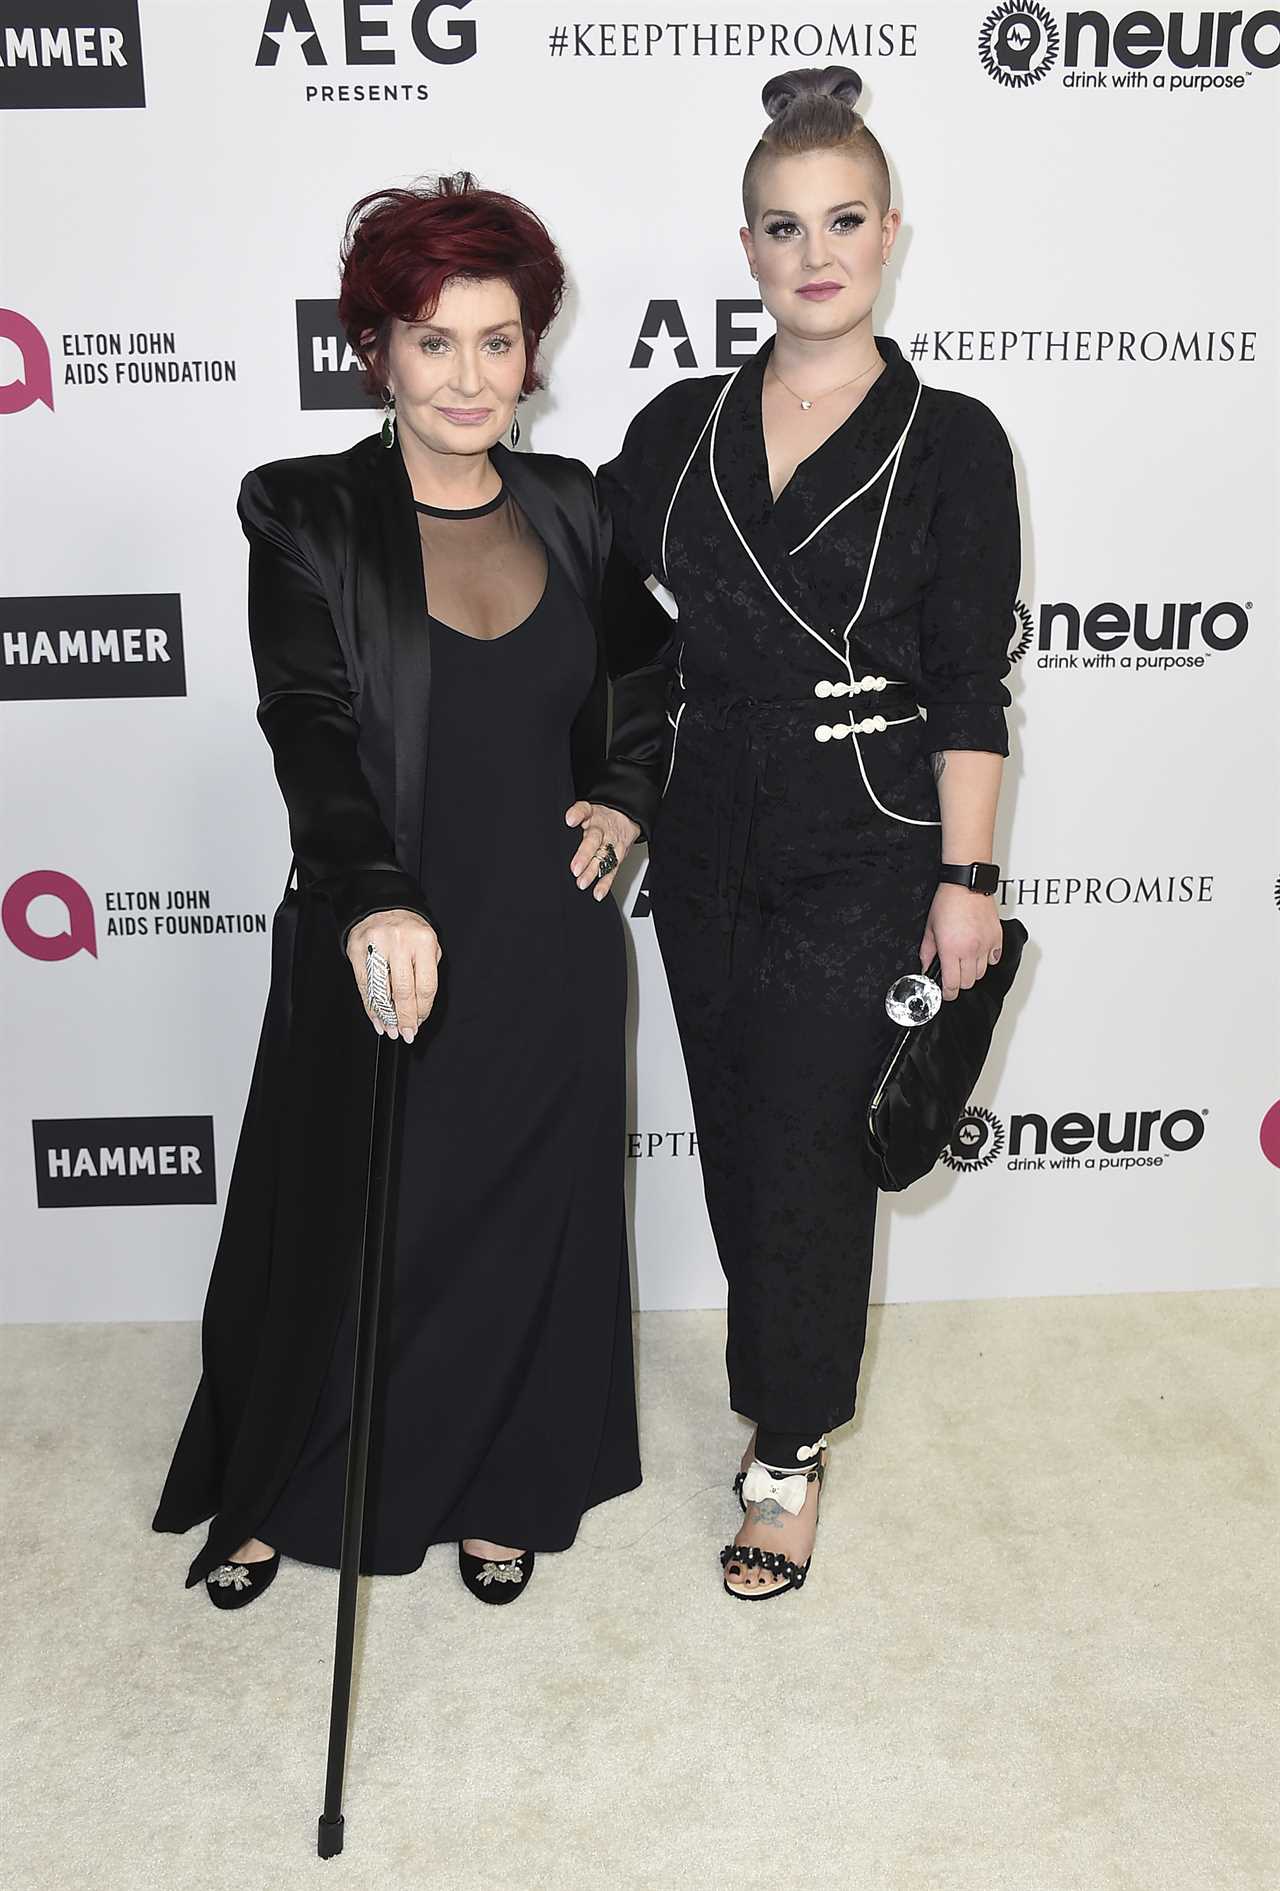 Sharon Osbourne reveals the name of daughter Kelly’s baby boy